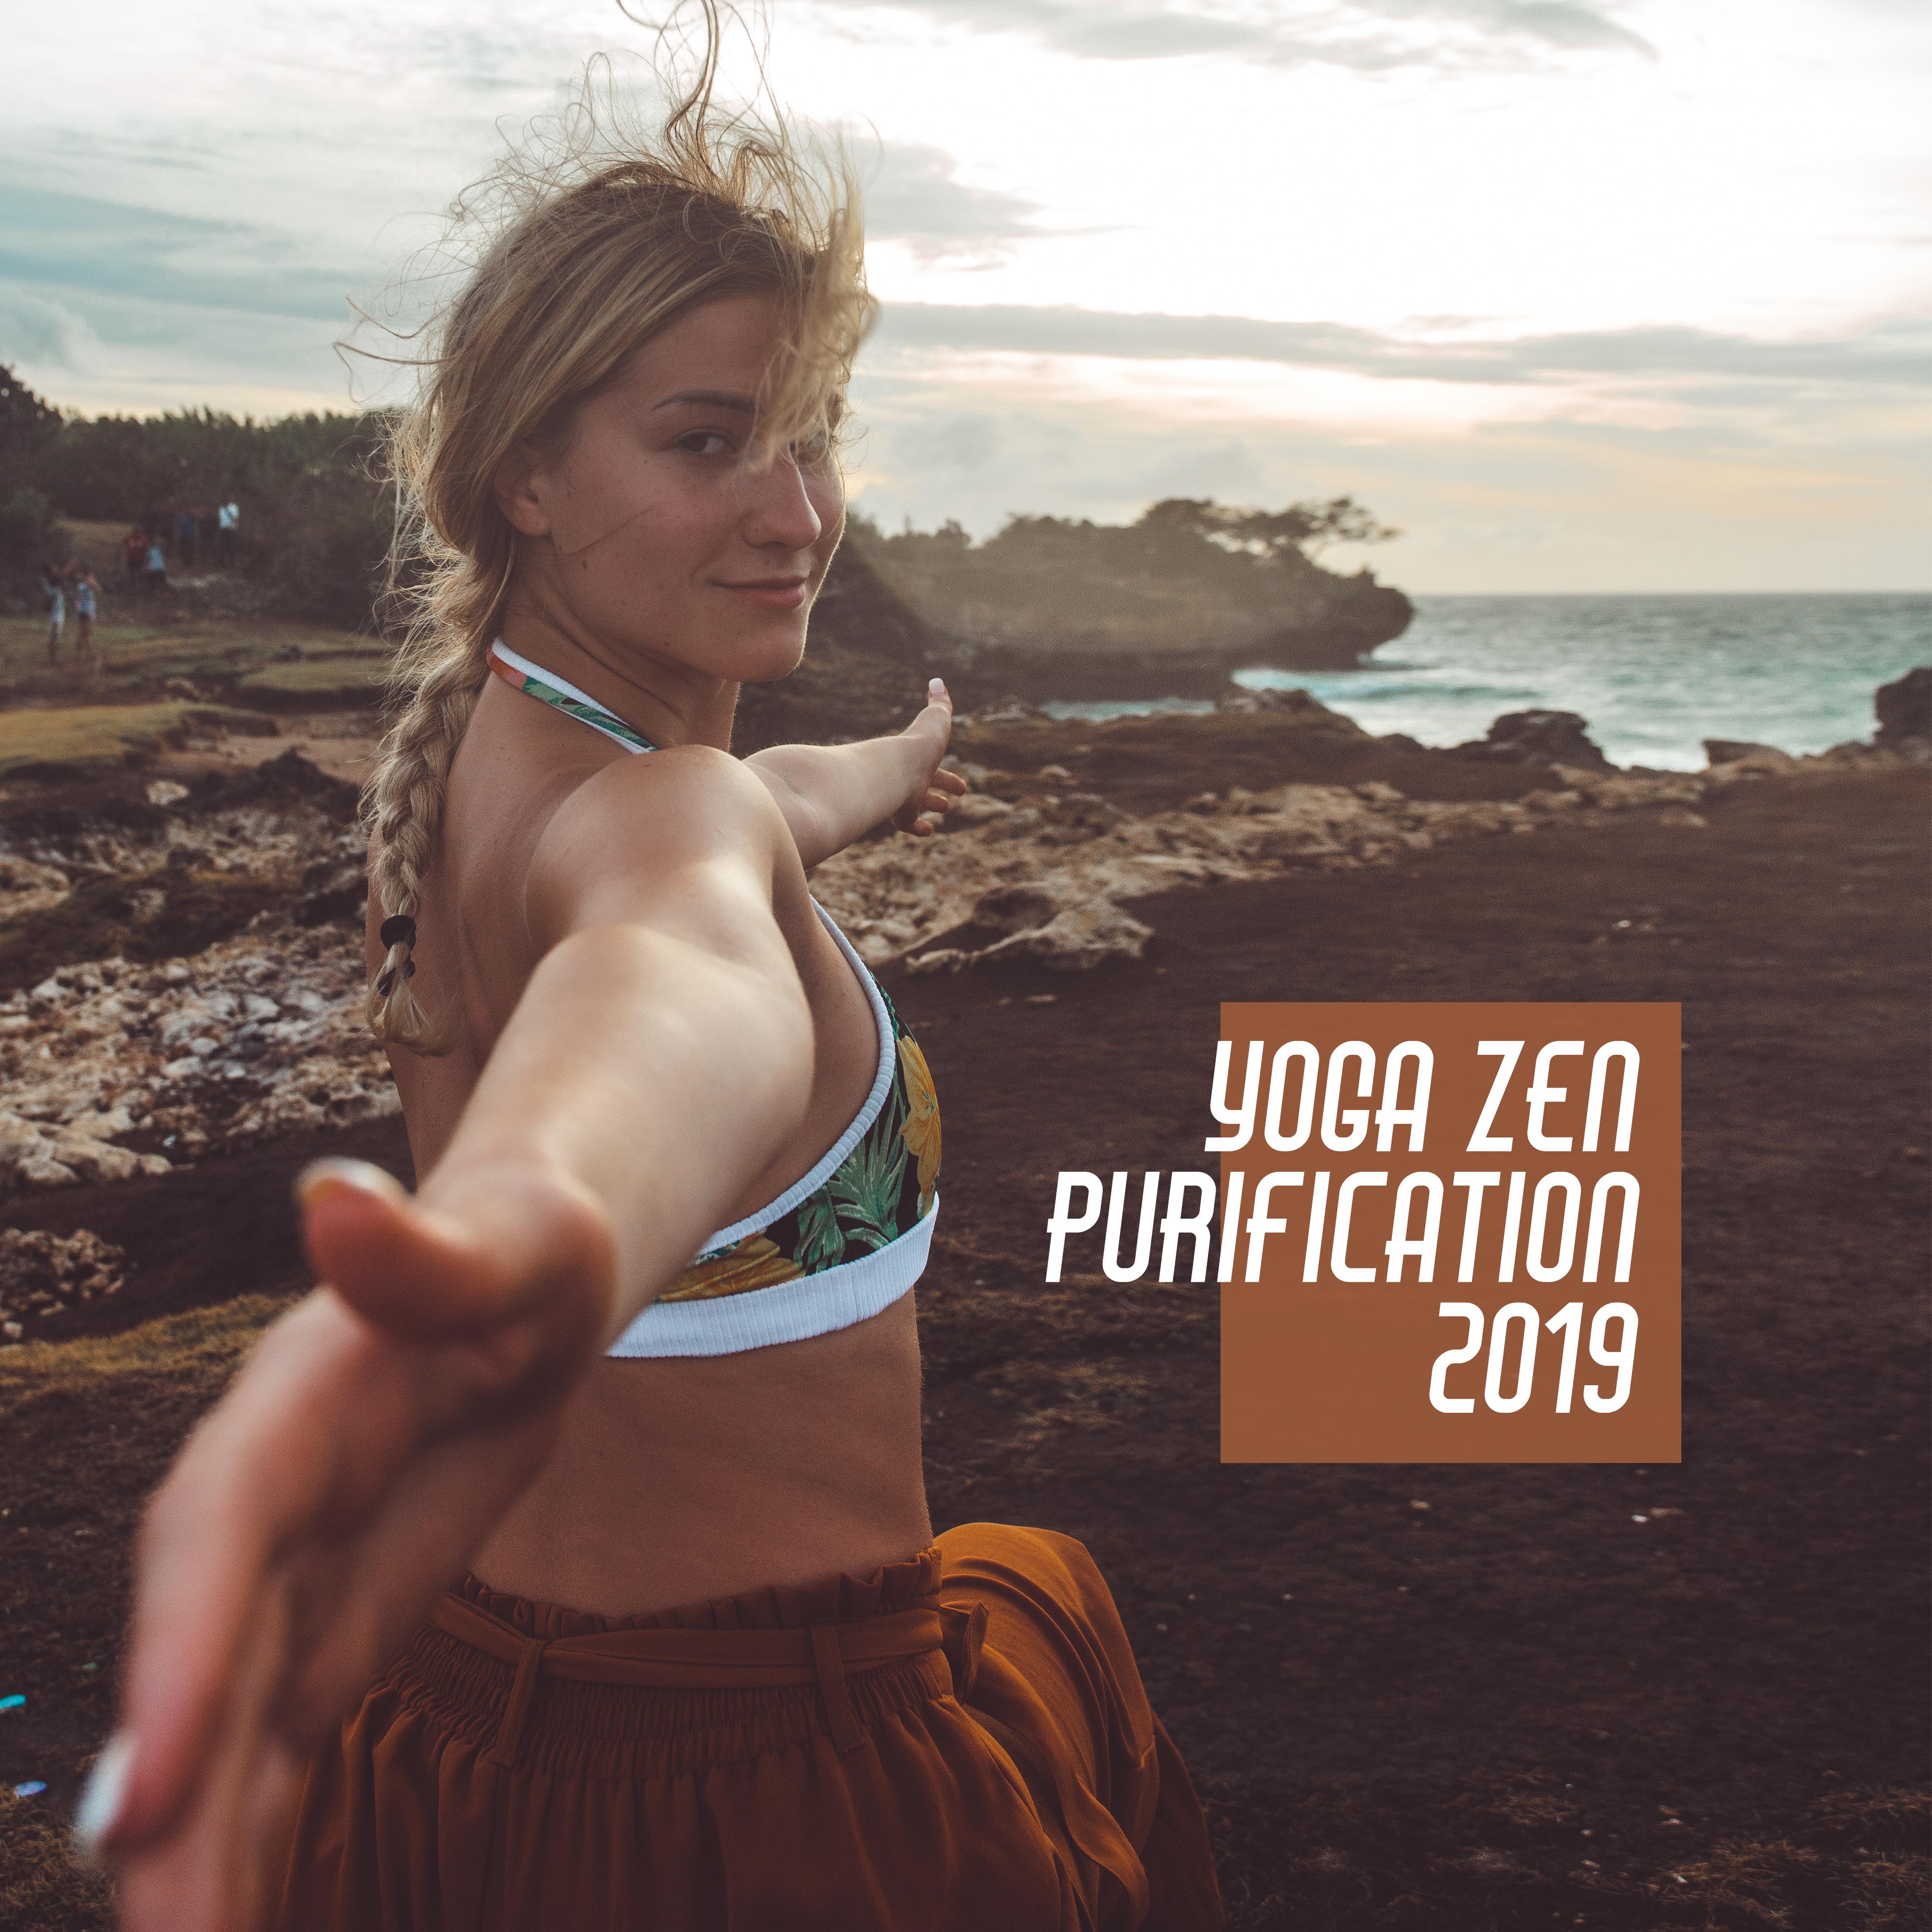 Yoga Zen Purification 2019: 15 New Age Deep Songs for Meditation & Inner Relaxation, Deeper Connection of Body & Mind, Mantra Melodies, Chakra Opening